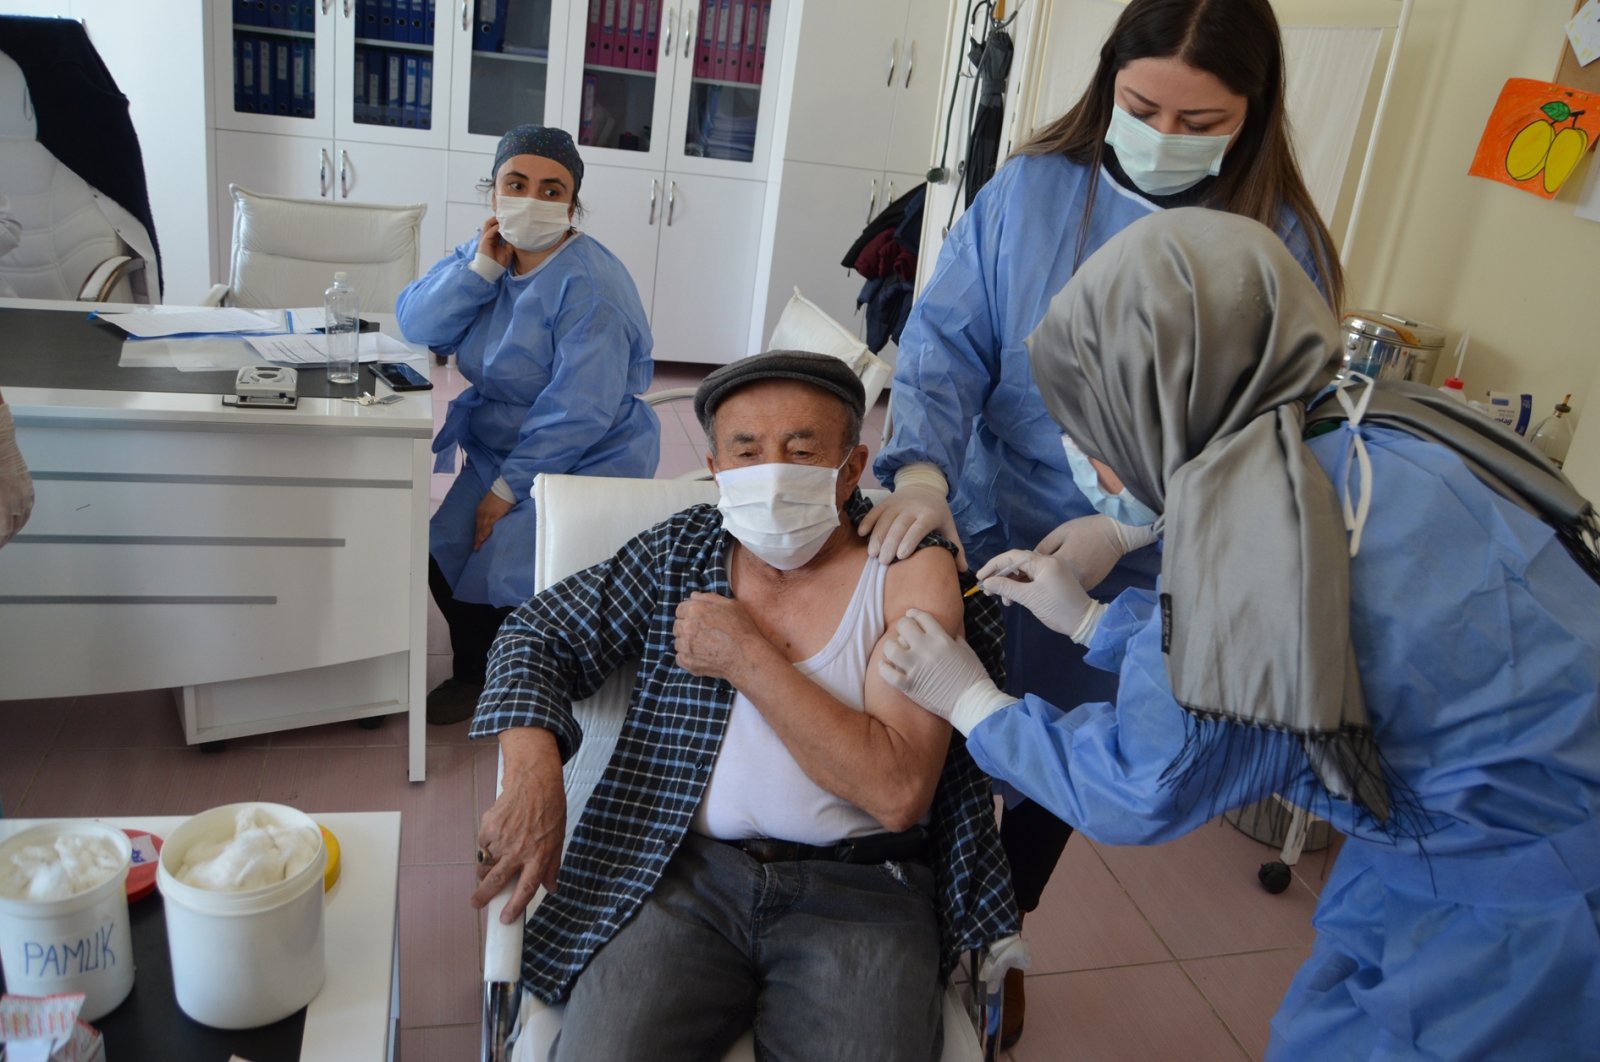 An elderly man gets vaccinated against COVID-19 at a clinic in Aksaray, central Turkey, Jan. 31, 2022. (DHA PHOTO)